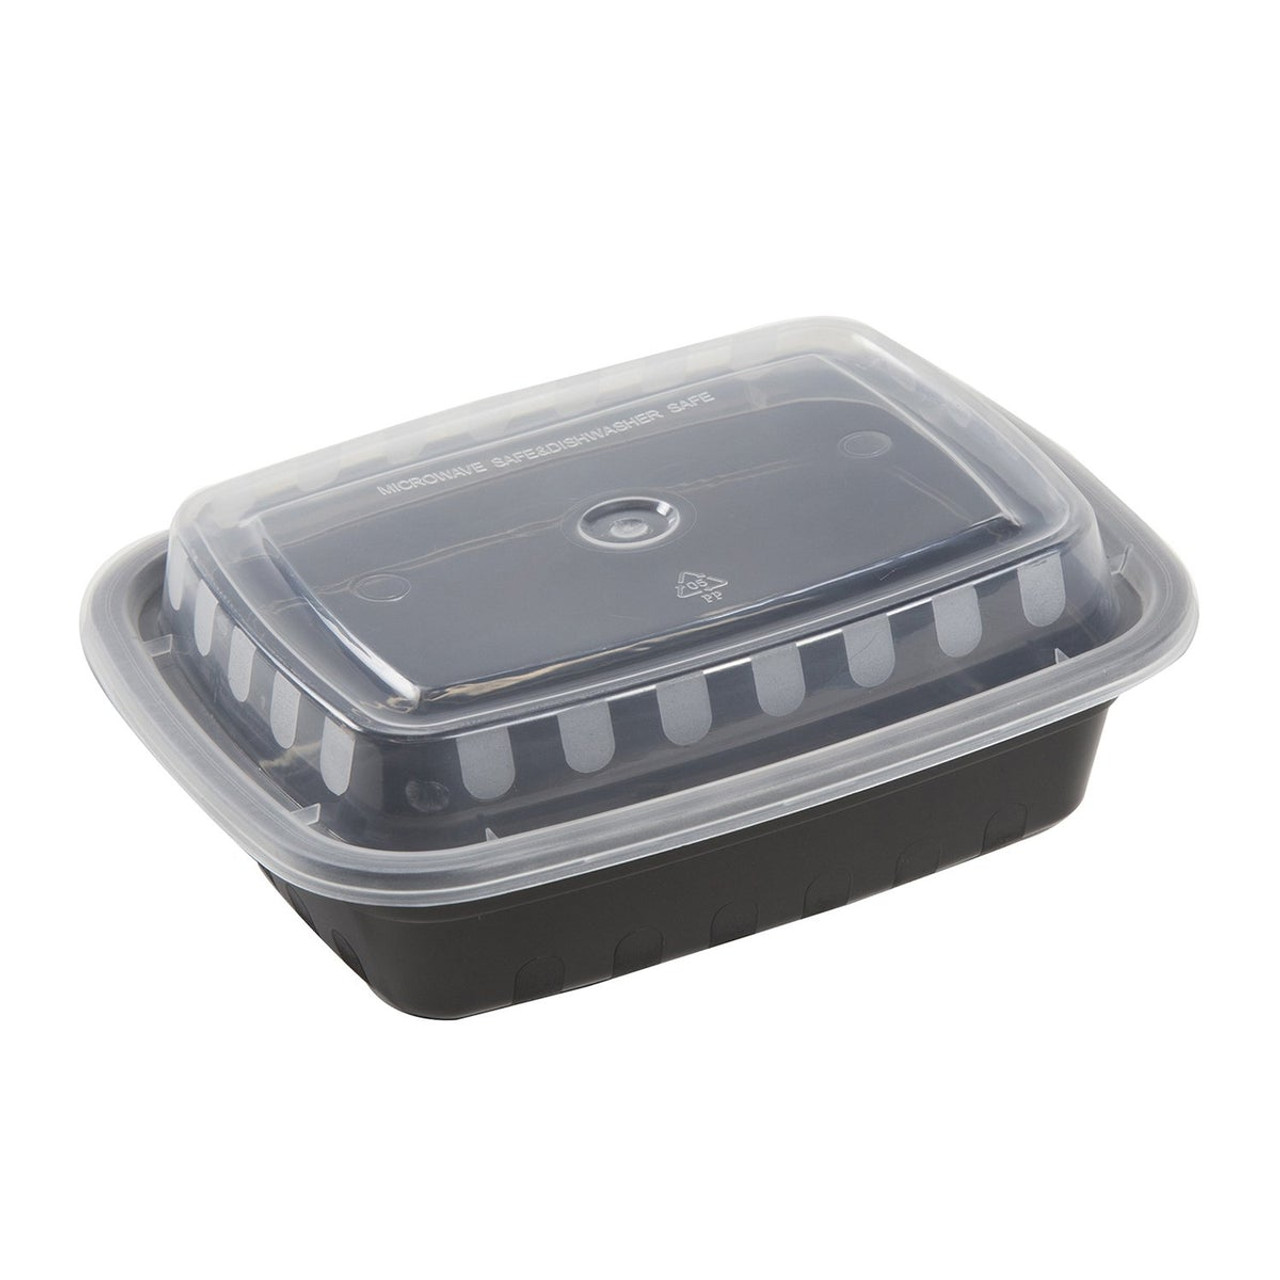 12oz Meal Prep Containers Small Food Storage BPA FREE Microwavable